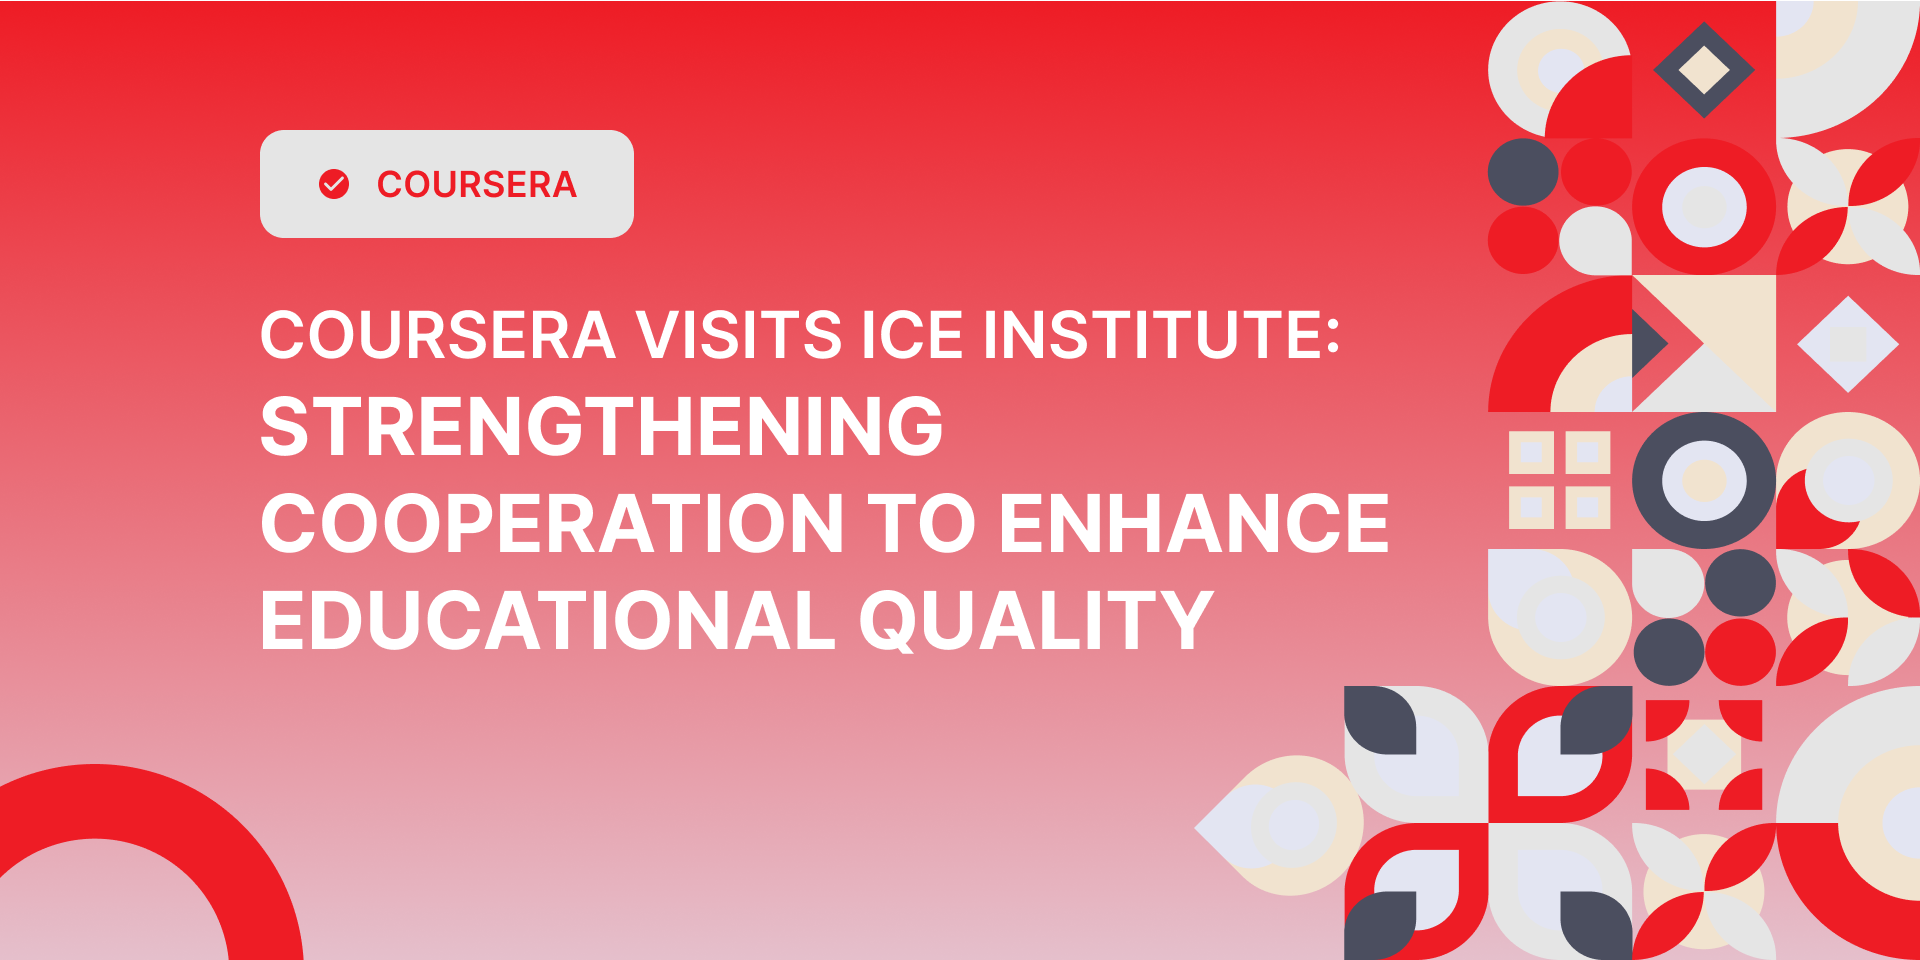 Coursera Visits ICE Institute: Strengthening Cooperation to Enhance Educational Quality